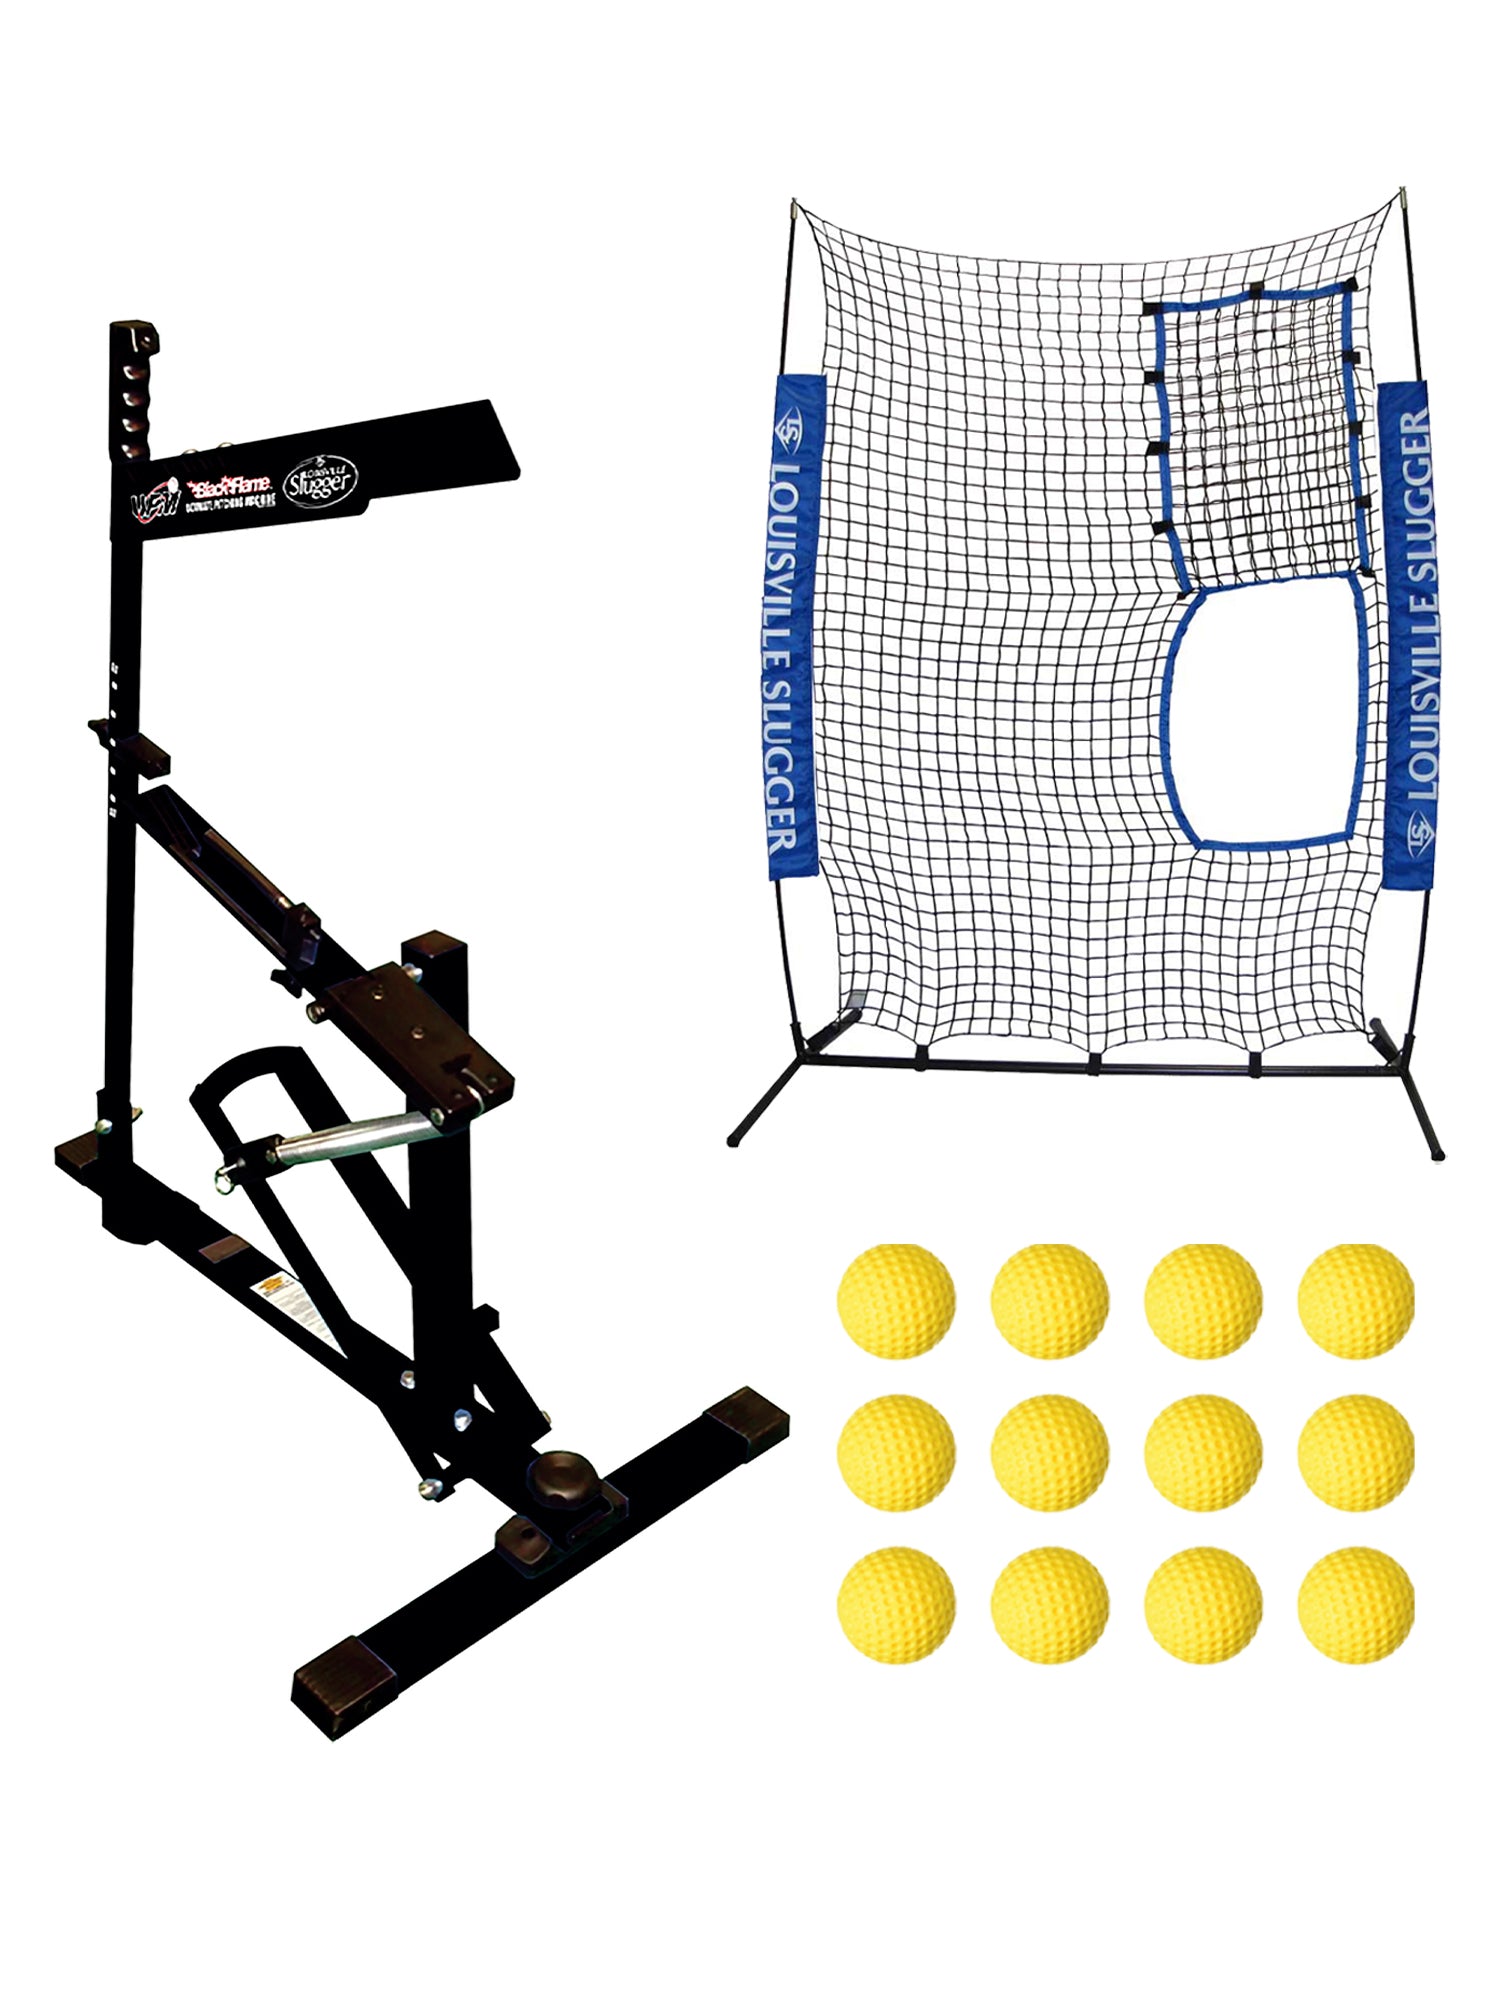 Louisville Slugger UPM 50 Black Flame Pitching Machine, Flex Protective Screen and Heater Sports 12-Pack Weighted Pitching Machine Baseballs Bundle - Pro-Distributing